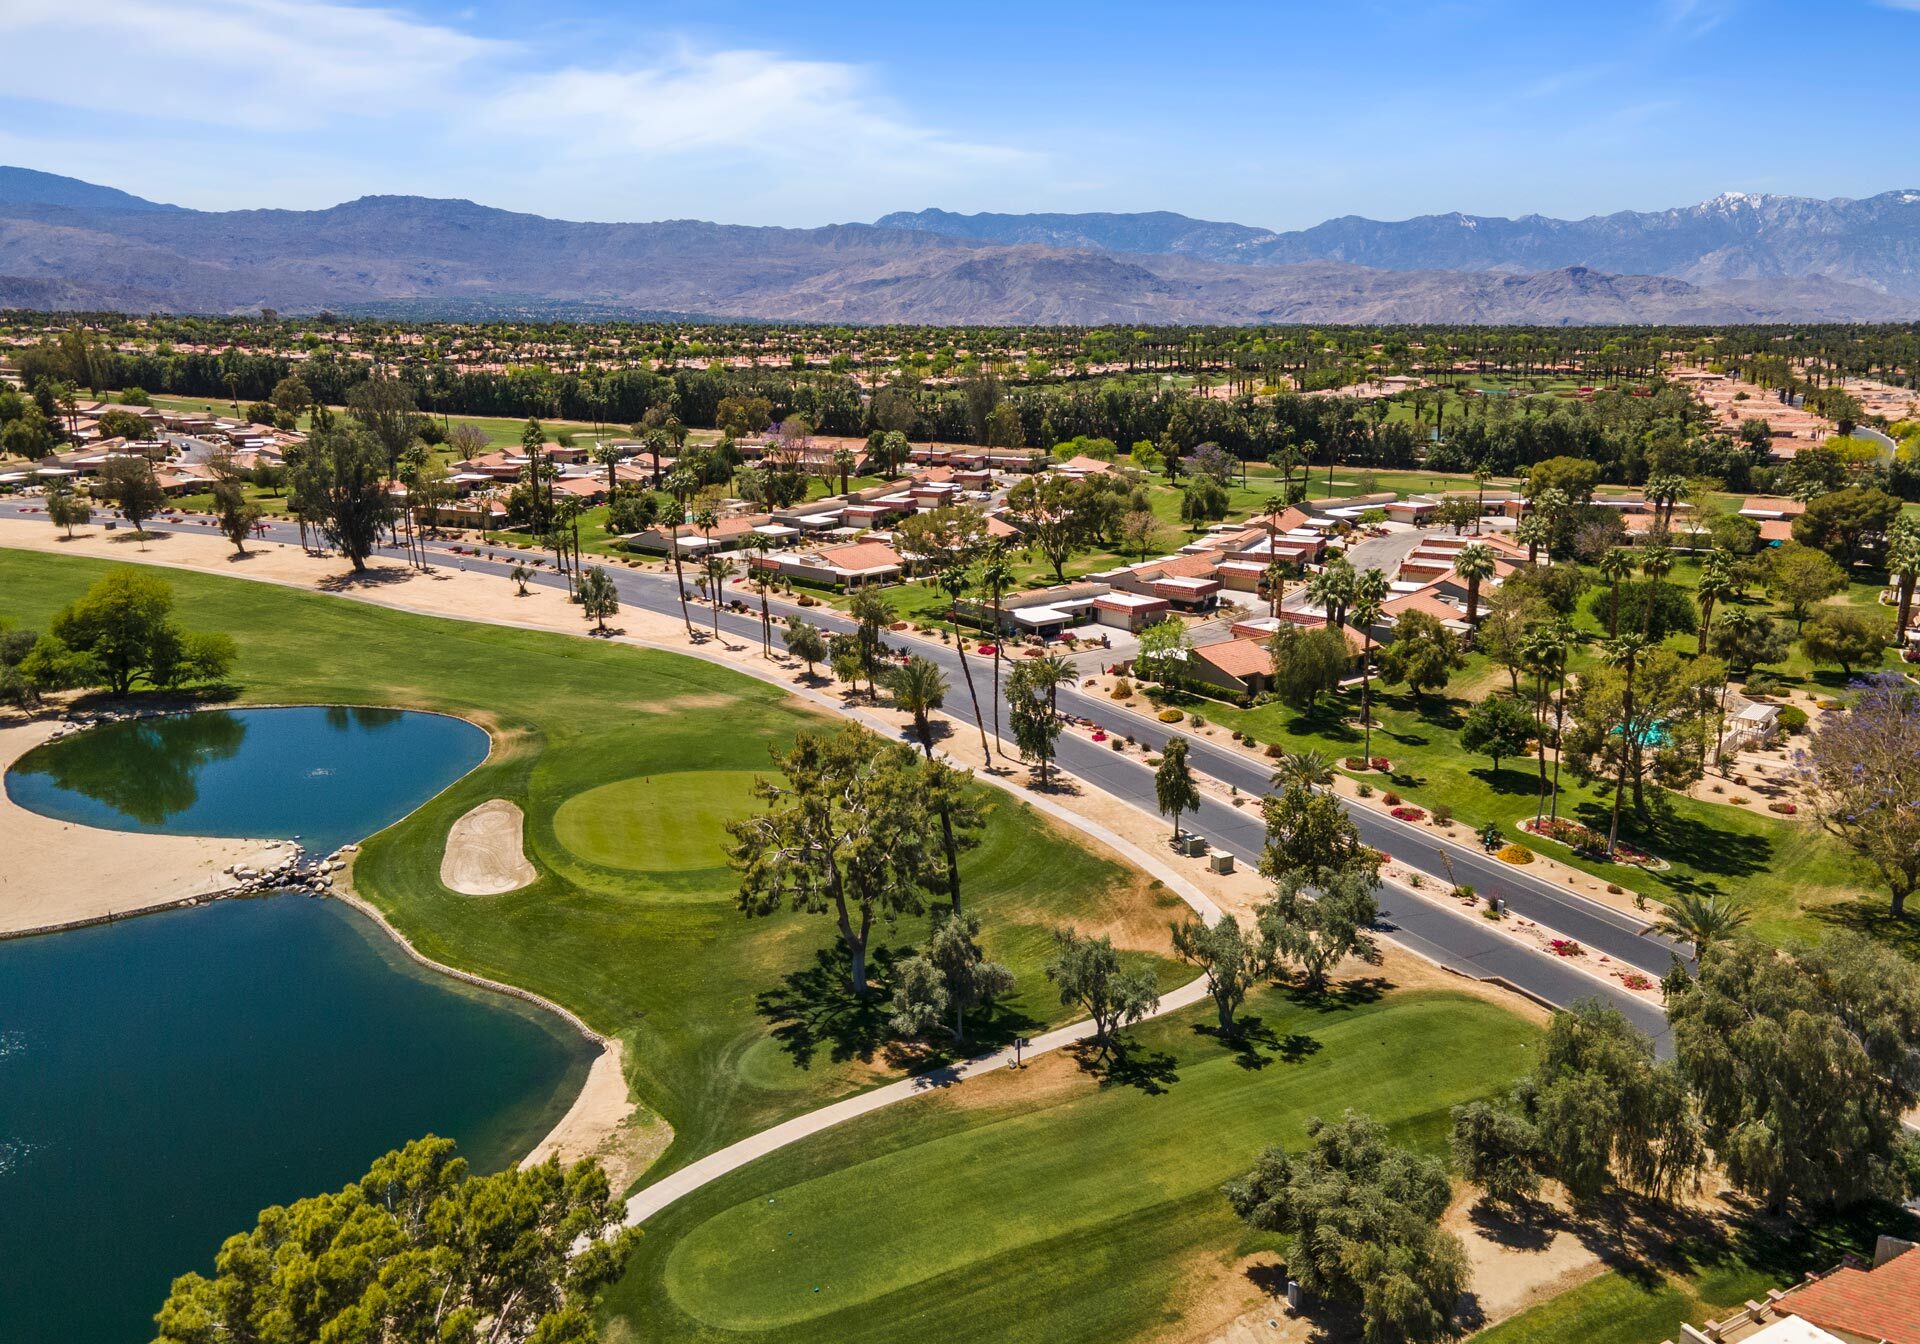 Aerial view of Palm Desert in California with lakes, homes and lots of palm trees